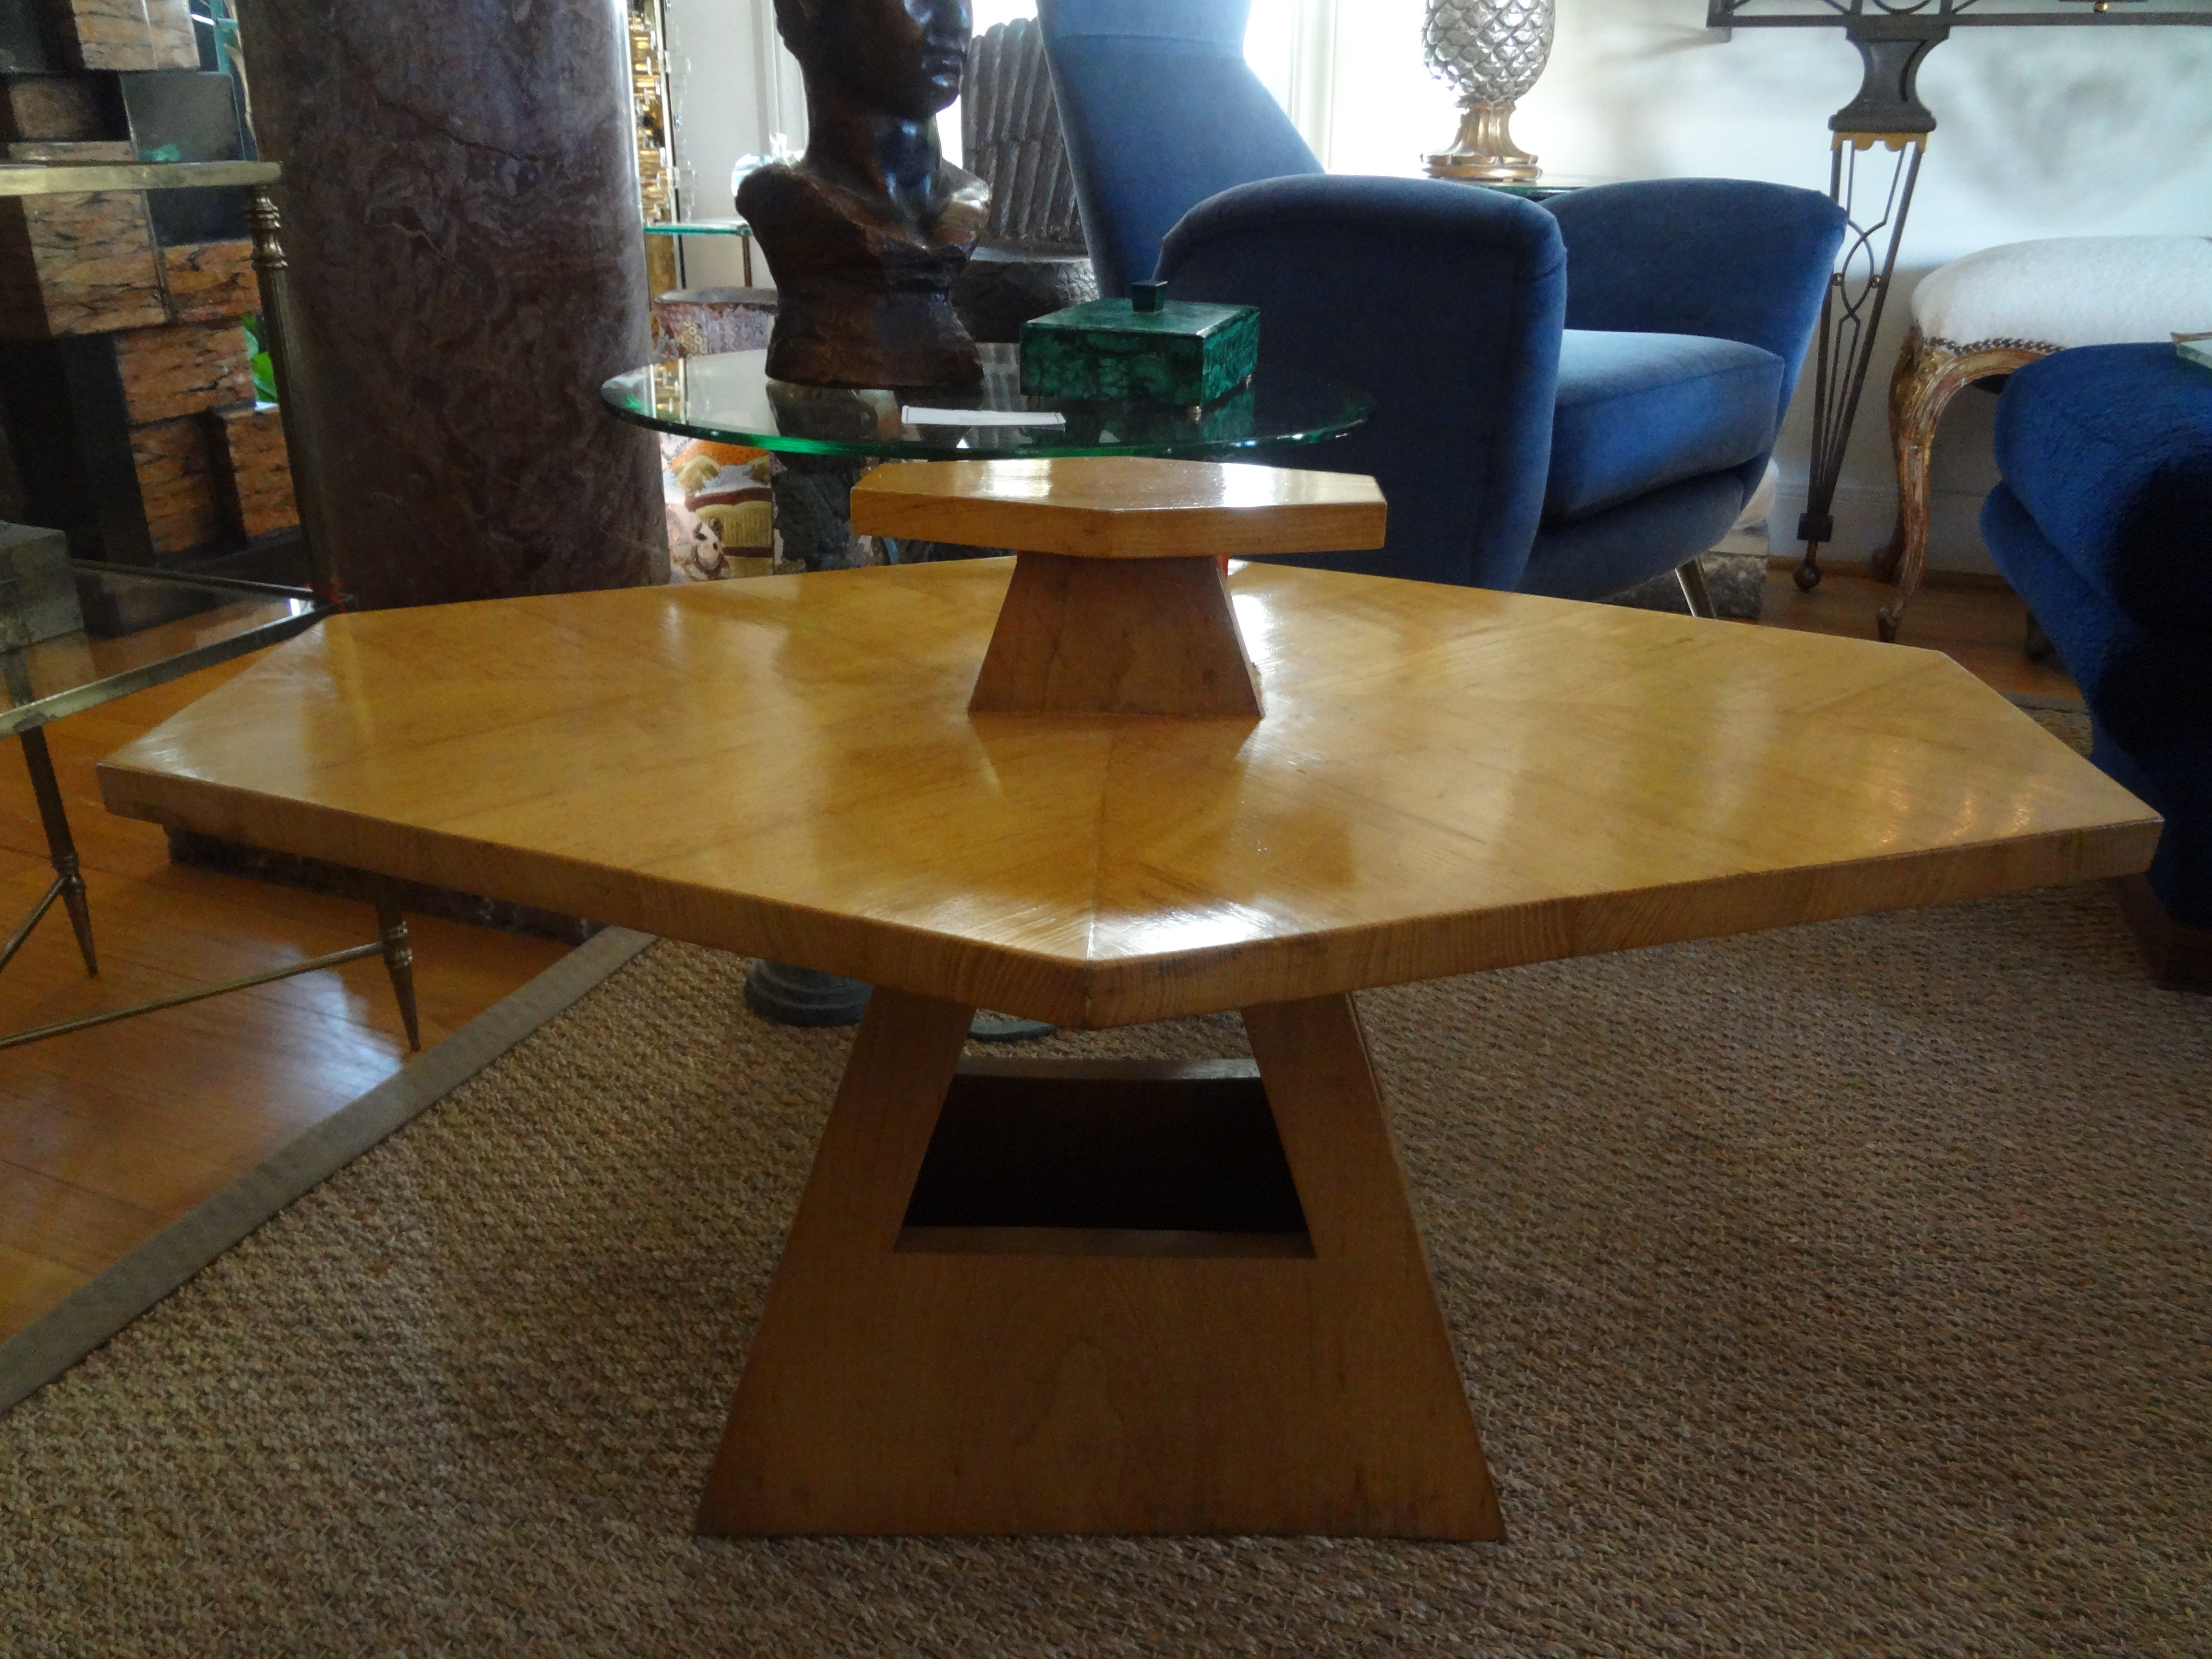 French Art Deco Table Attributed To Jules Leleu.
This handsome period French Art Deco table features an unusual geometric design with a handle and an open base design.
This versatile French table, made of Sycamore can be used as a cocktail table,